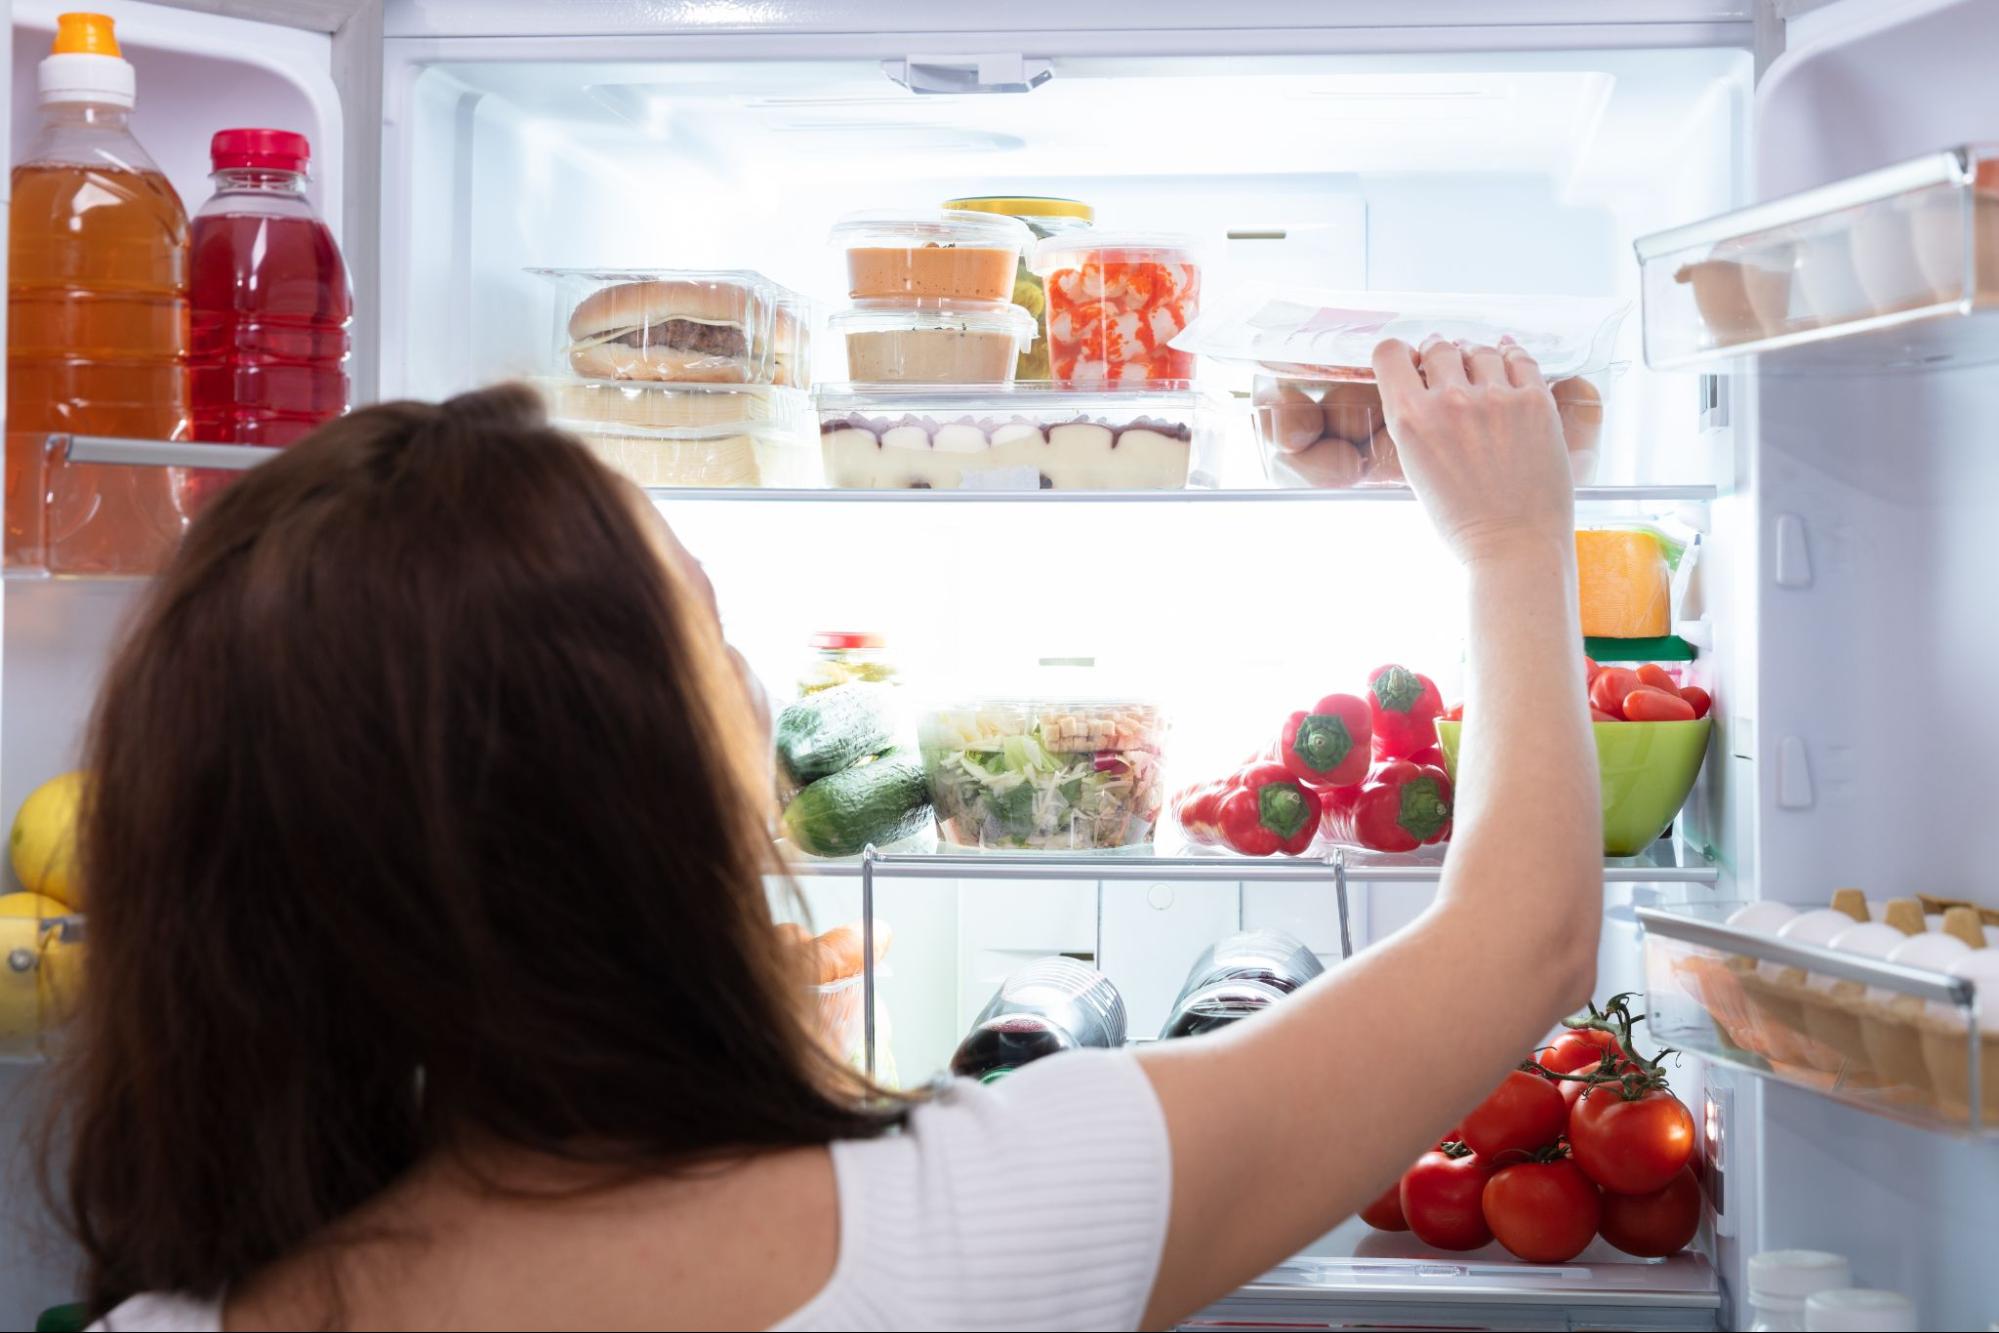 Woman reaching into a well-lit, well-stocked refrigerator